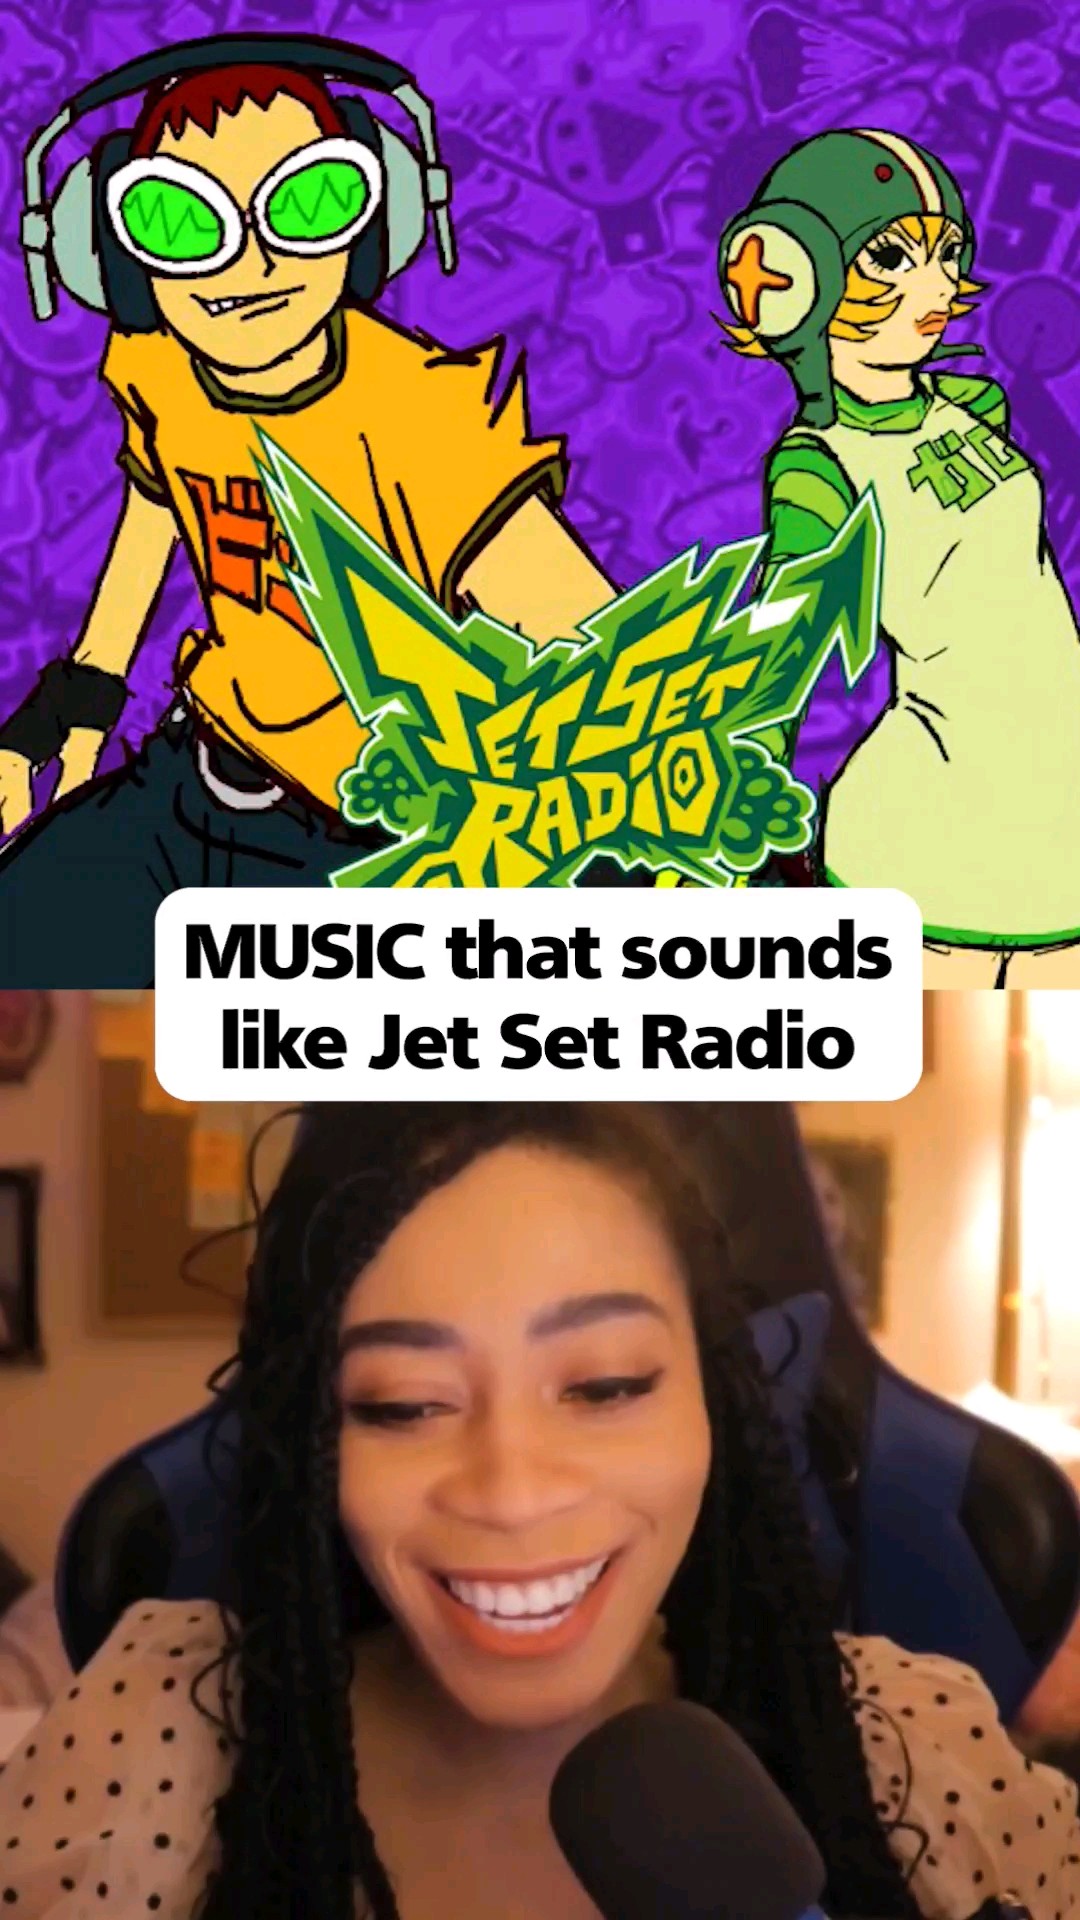 IF YOU LIKE JET SET RADIO MUSIC, YOU'LL LOVE THIS SONG #videogames #gaming #jetsetradio #shorts #fyp